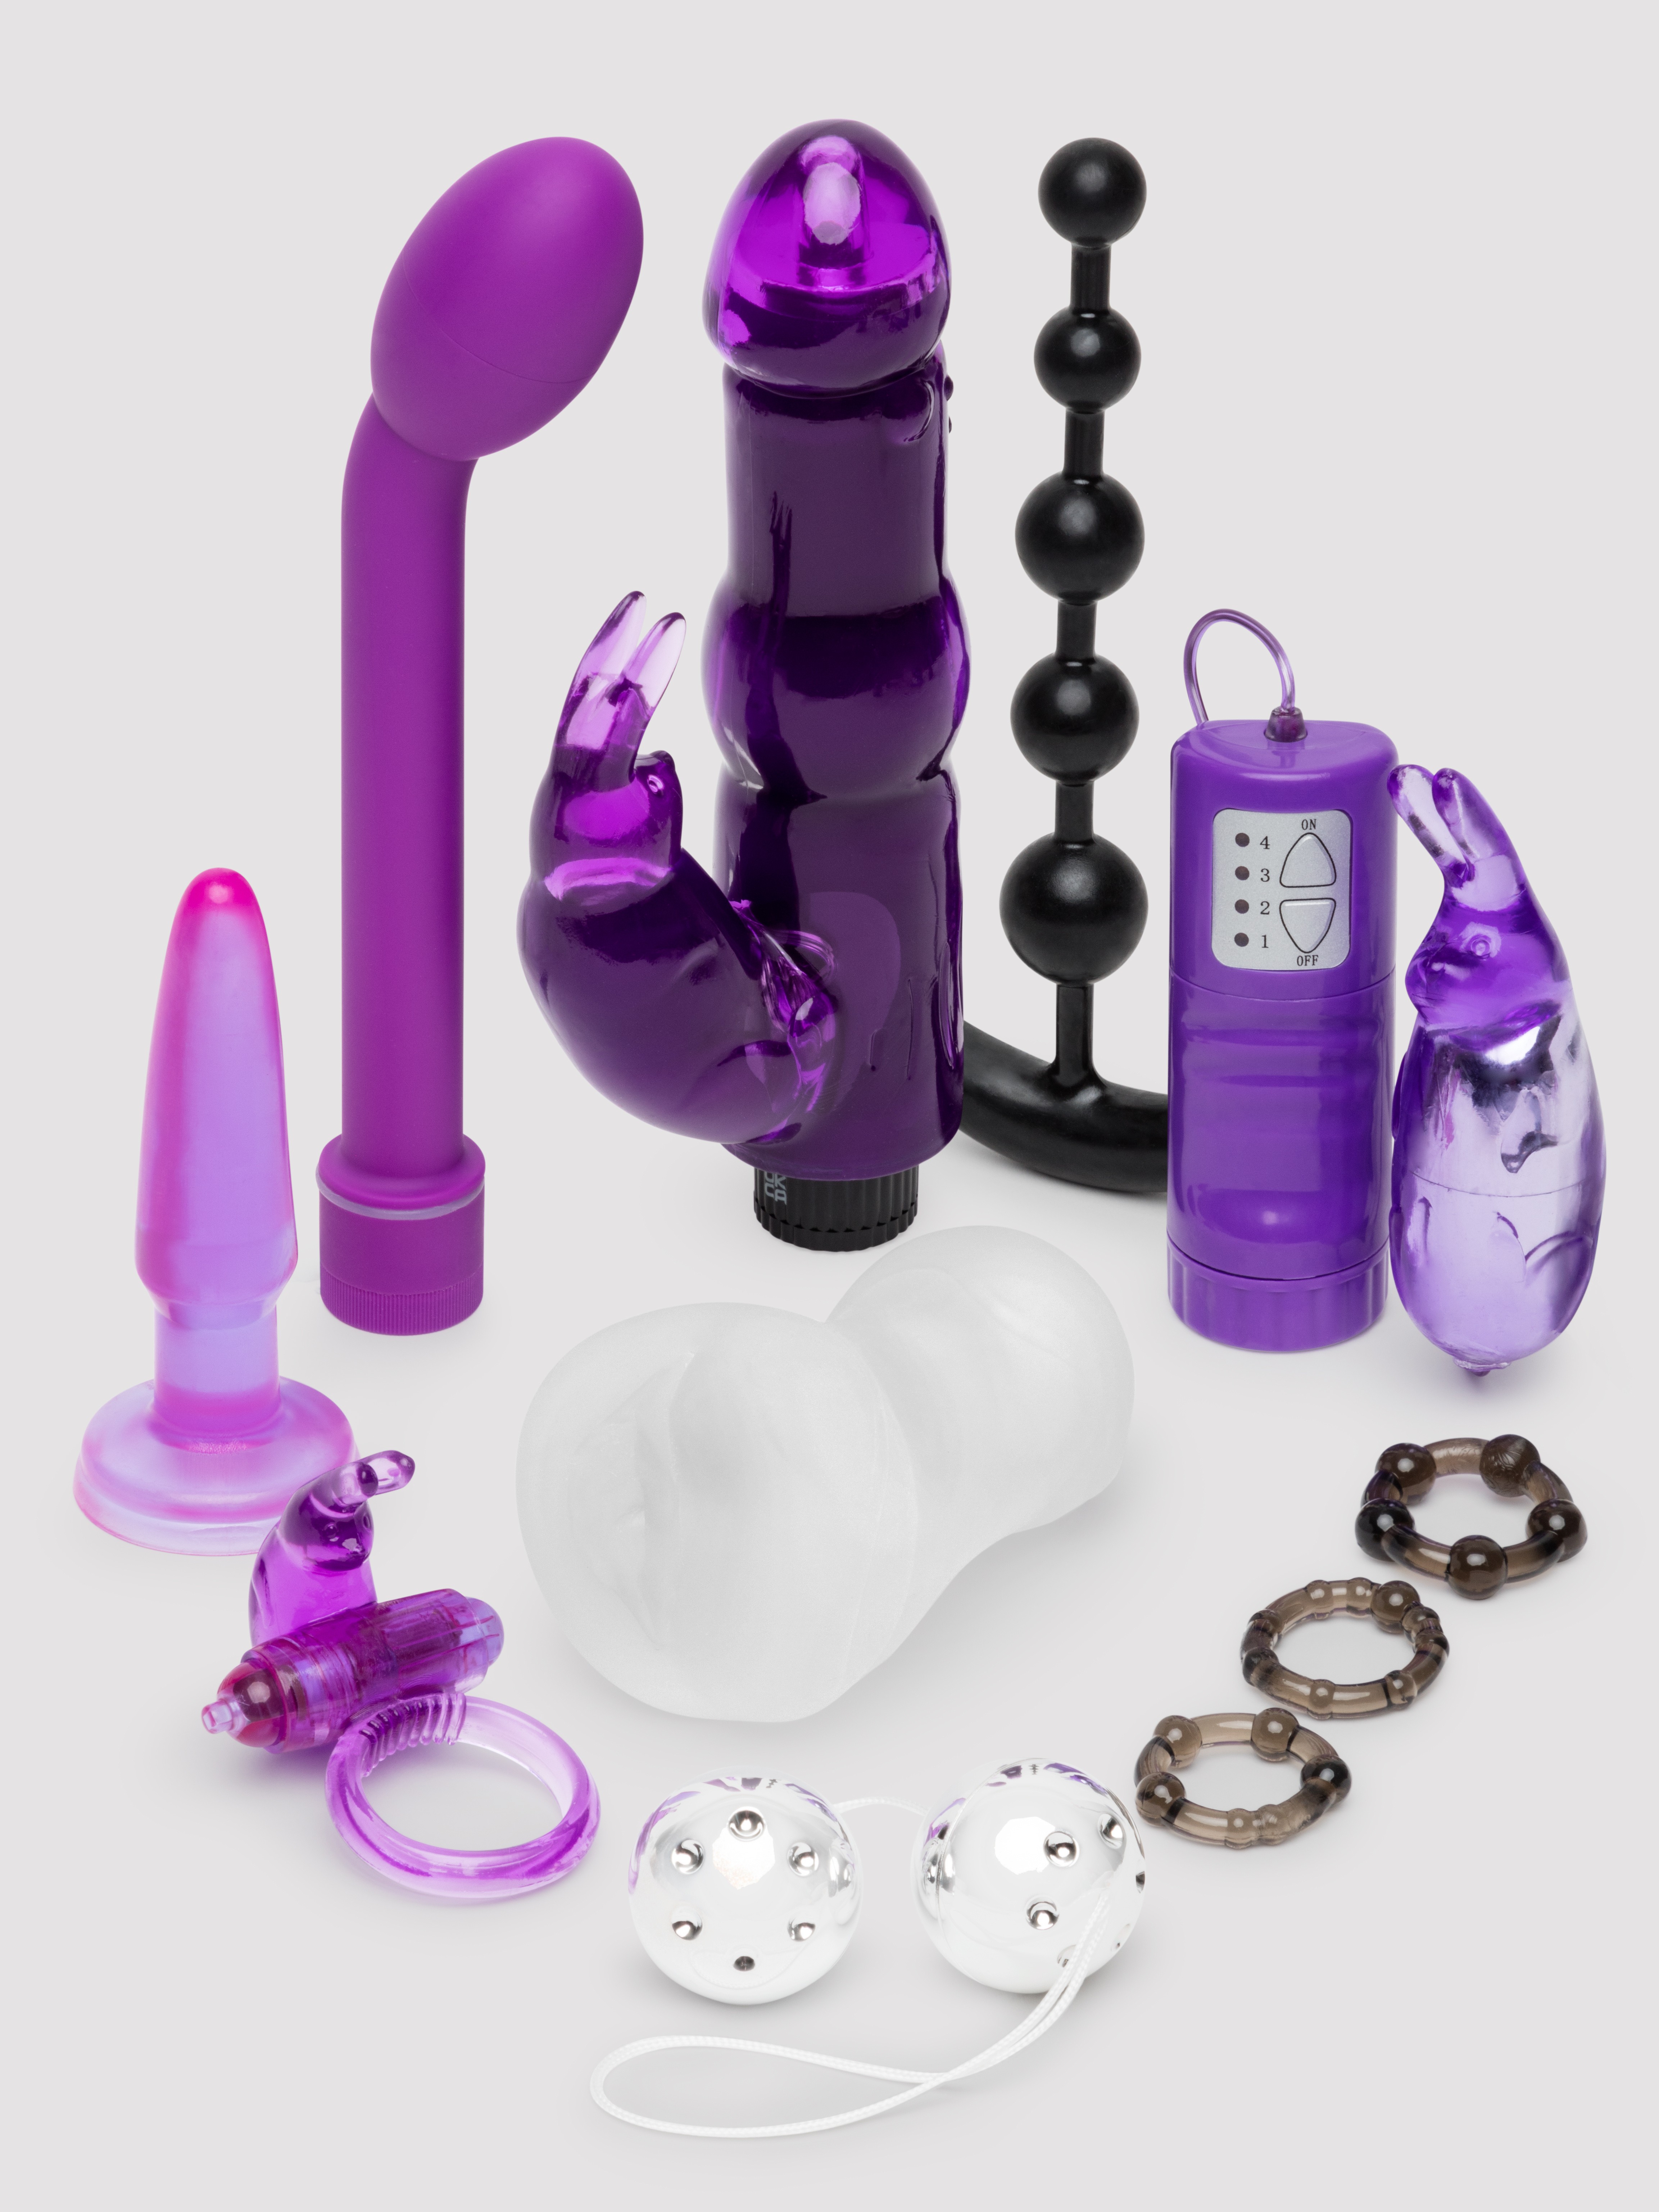 An amazing night of BJs and sex toys